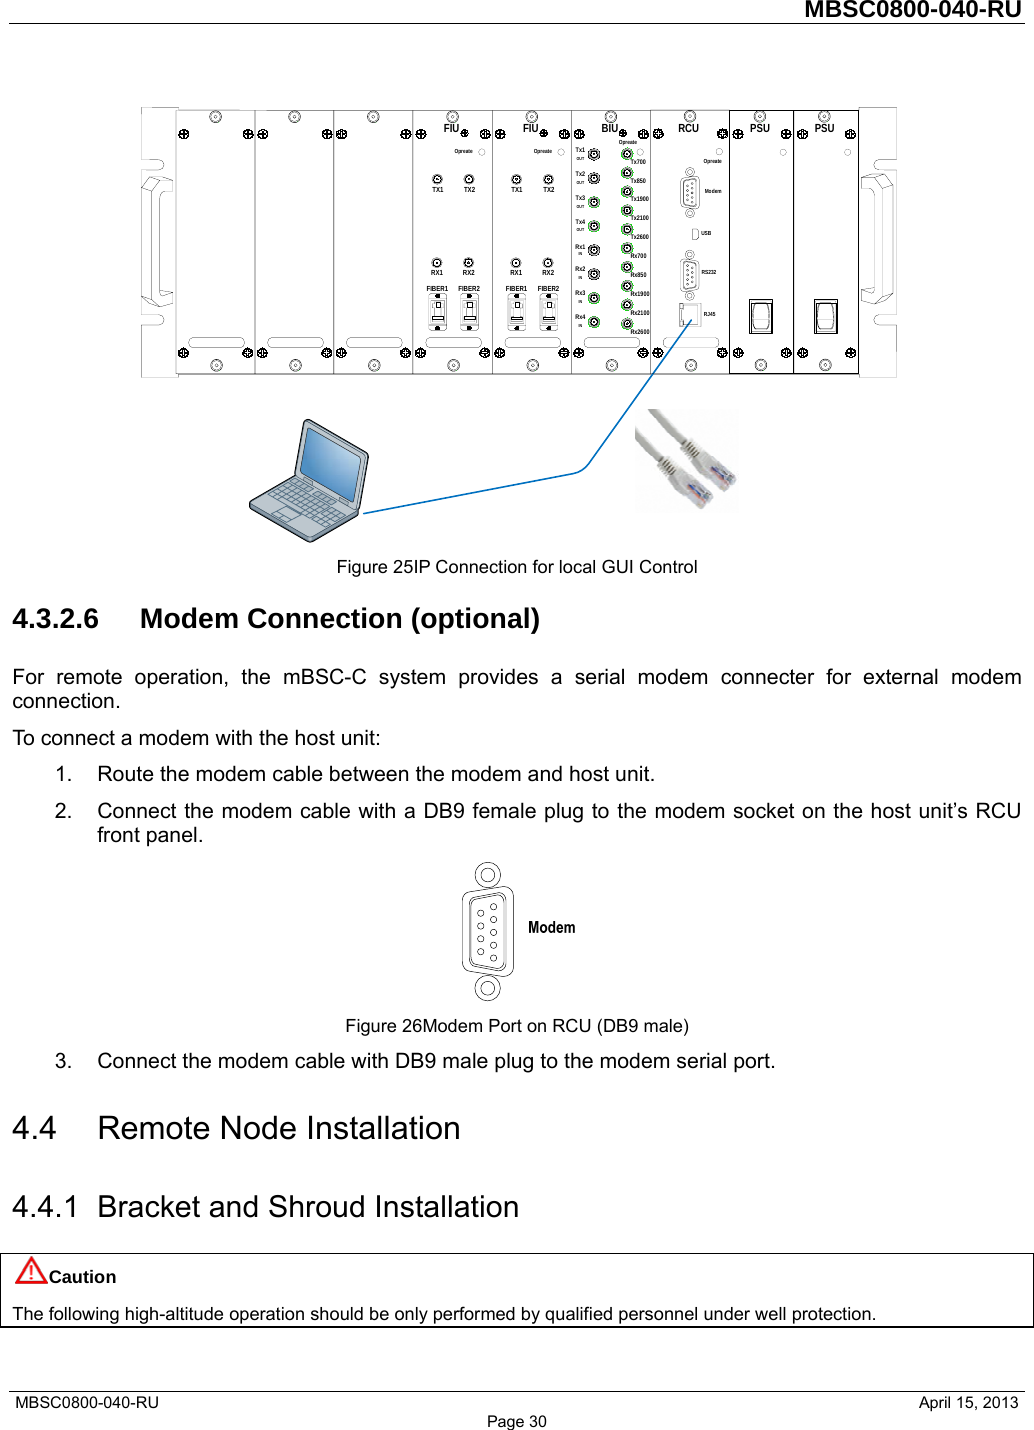         MBSC0800-040-RU   MBSC0800-040-RU                                                   April 15, 2013 Page 30  Figure 25IP Connection for local GUI Control 4.3.2.6 Modem Connection (optional) For remote operation, the mBSC-C system provides a serial modem connecter for external modem connection. To connect a modem with the host unit: 1.  Route the modem cable between the modem and host unit. 2.  Connect the modem cable with a DB9 female plug to the modem socket on the host unit’s RCU front panel.  Figure 26Modem Port on RCU (DB9 male) 3.  Connect the modem cable with DB9 male plug to the modem serial port. 4.4 Remote Node Installation 4.4.1  Bracket and Shroud Installation Caution The following high-altitude operation should be only performed by qualified personnel under well protection. PSU10PSU10FIUOpreateFIBER2TX2RX2FIBER1TX1RX1FIUOpreateFIBER2TX2RX2FIBER1TX1RX1BIUOpreateTx700Rx4INRx3INRx2INRx1INTx4OUTTx3OUTTx2OUTTx1OUTTx850Tx1900Tx2100Tx2600Rx700Rx850Rx1900Rx2100Rx2600RCUOpreateRJ45RS232ModemUSB